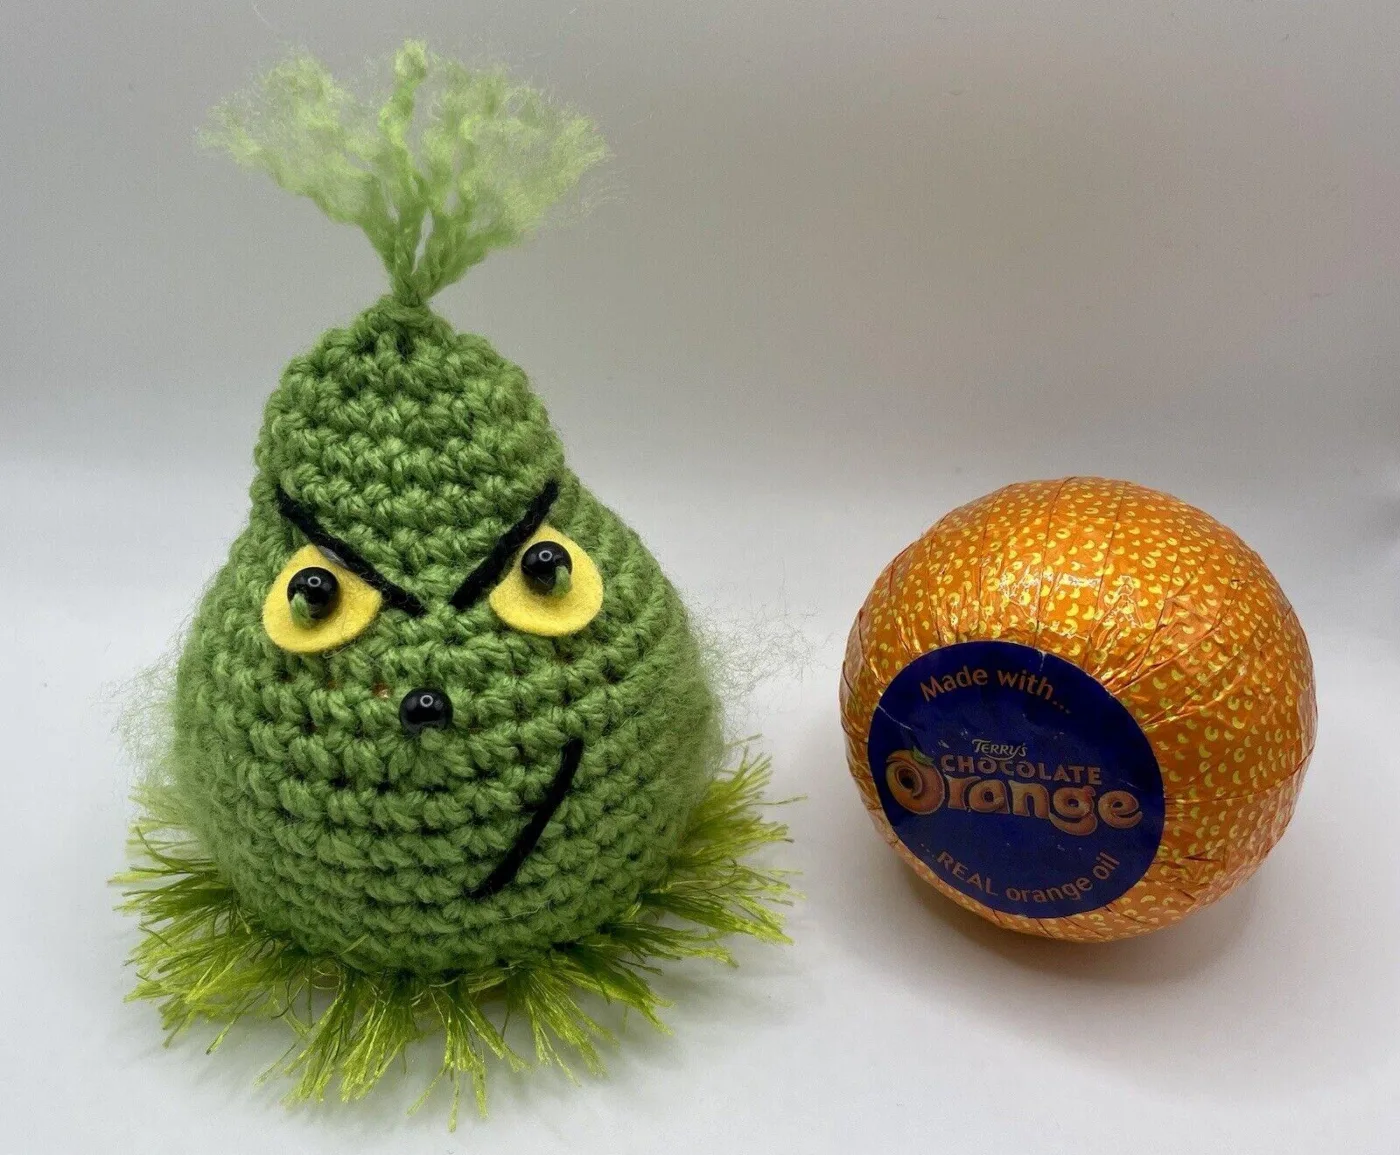 The grinch chocolate orange cover with orange